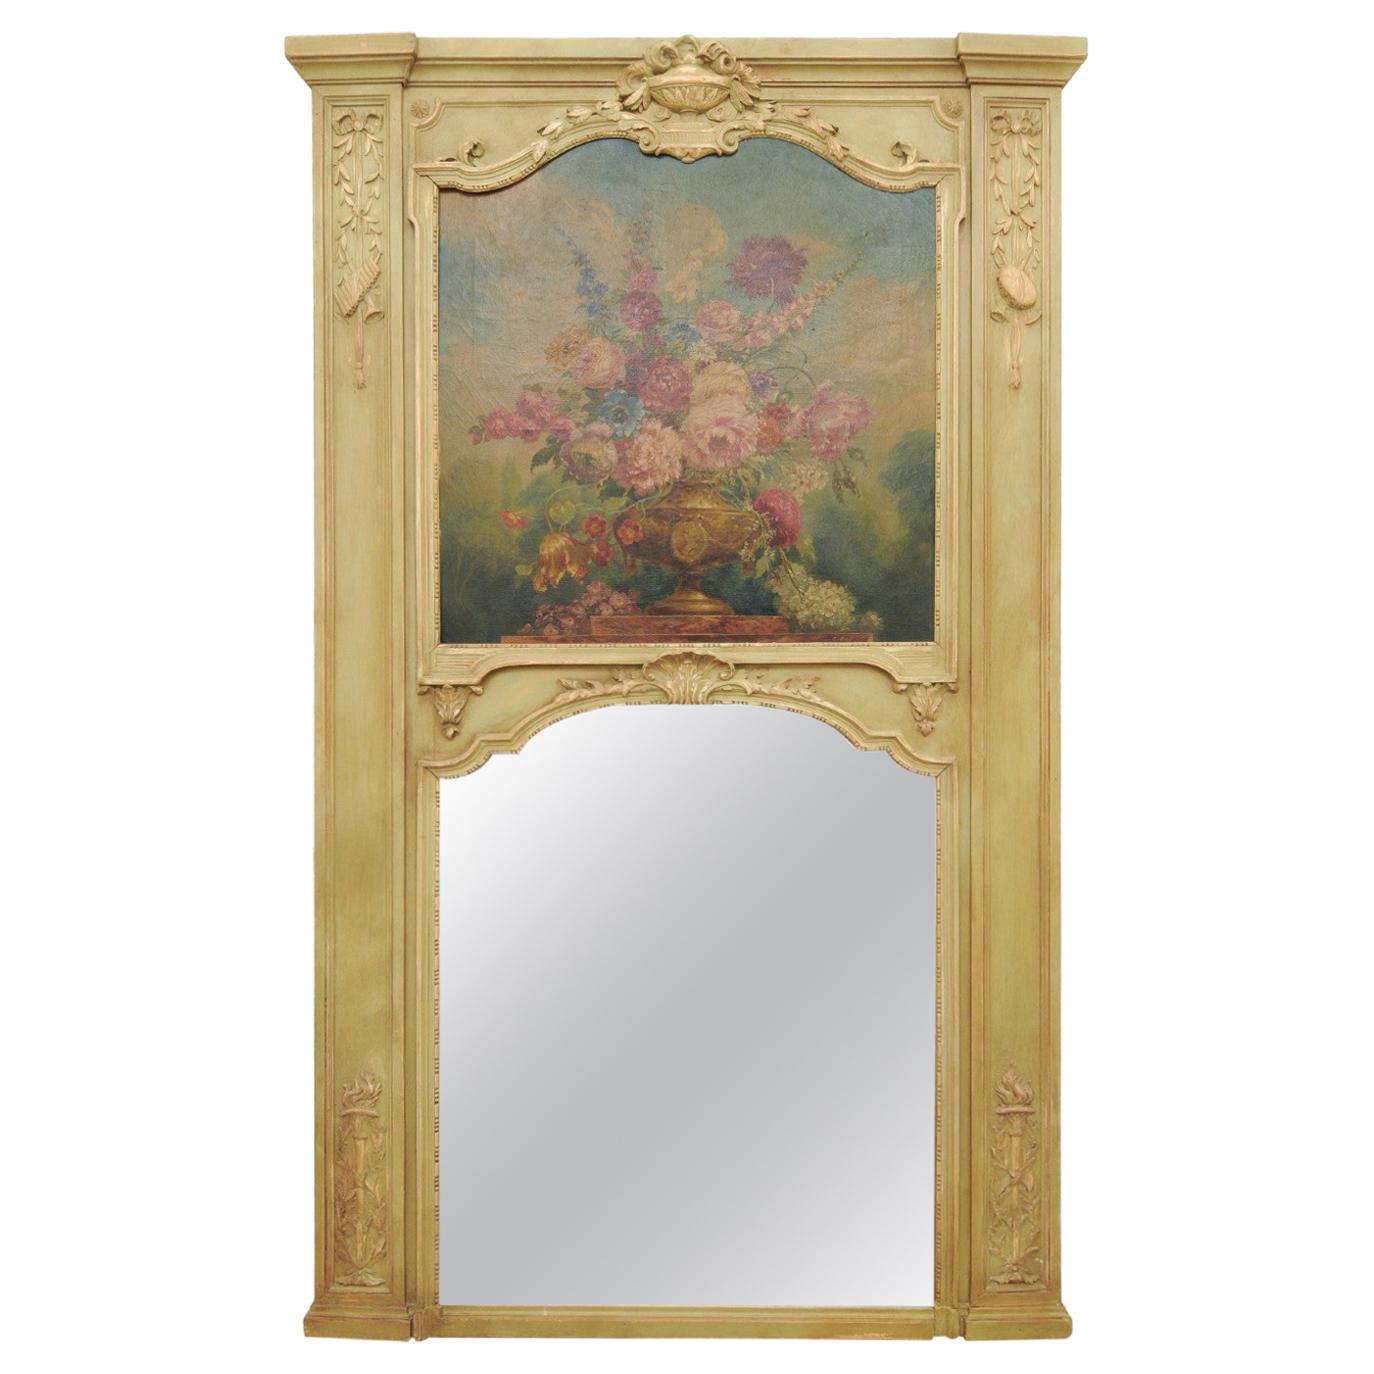 French 1870s Napoléon III Period Painted Trumeau Mirror with Floral Oil Painting